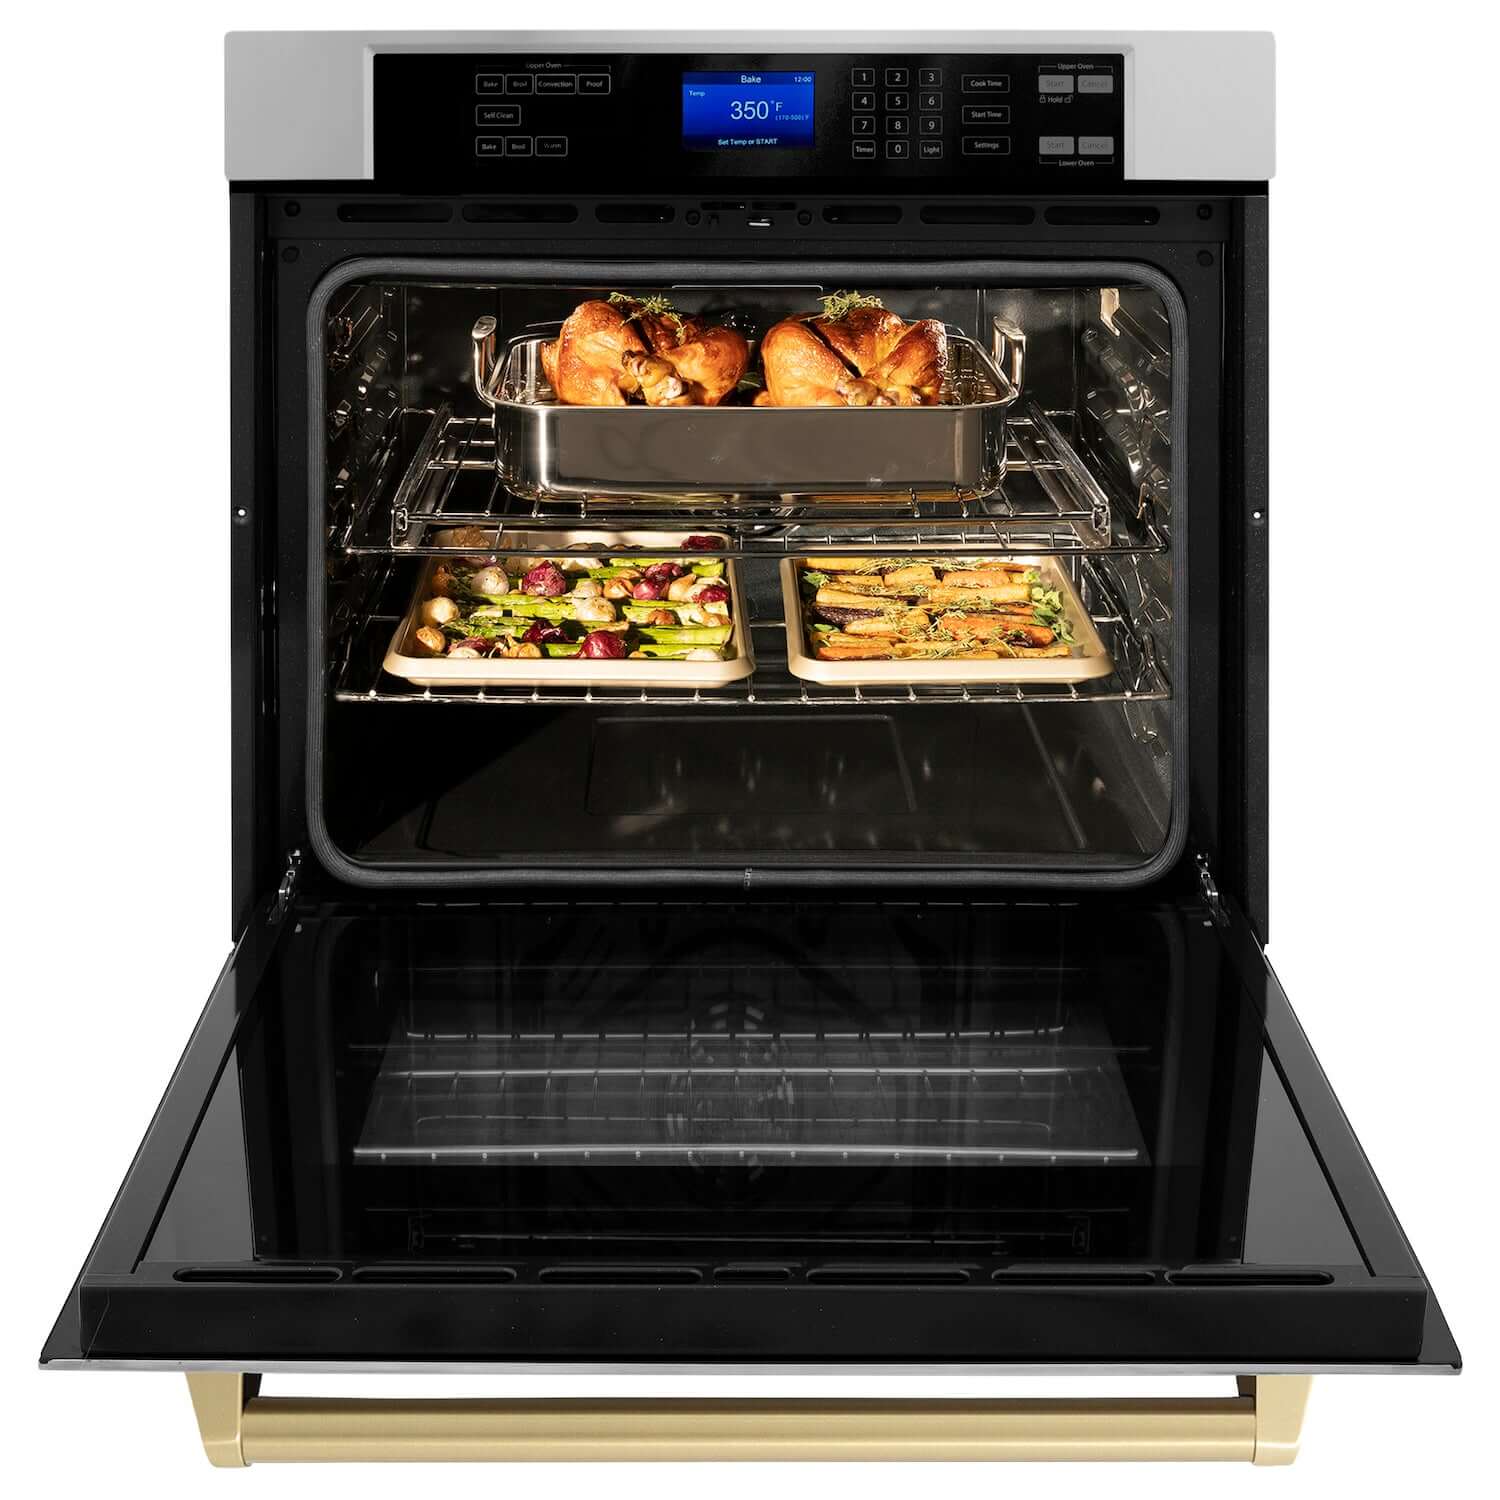 ZLINE Autograph Edition 30 in. Electric Single Wall Oven with Self Clean and True Convection in Stainless Steel and Champagne Bronze Accents (AWSZ-30-CB) front, open with cooked food inside.